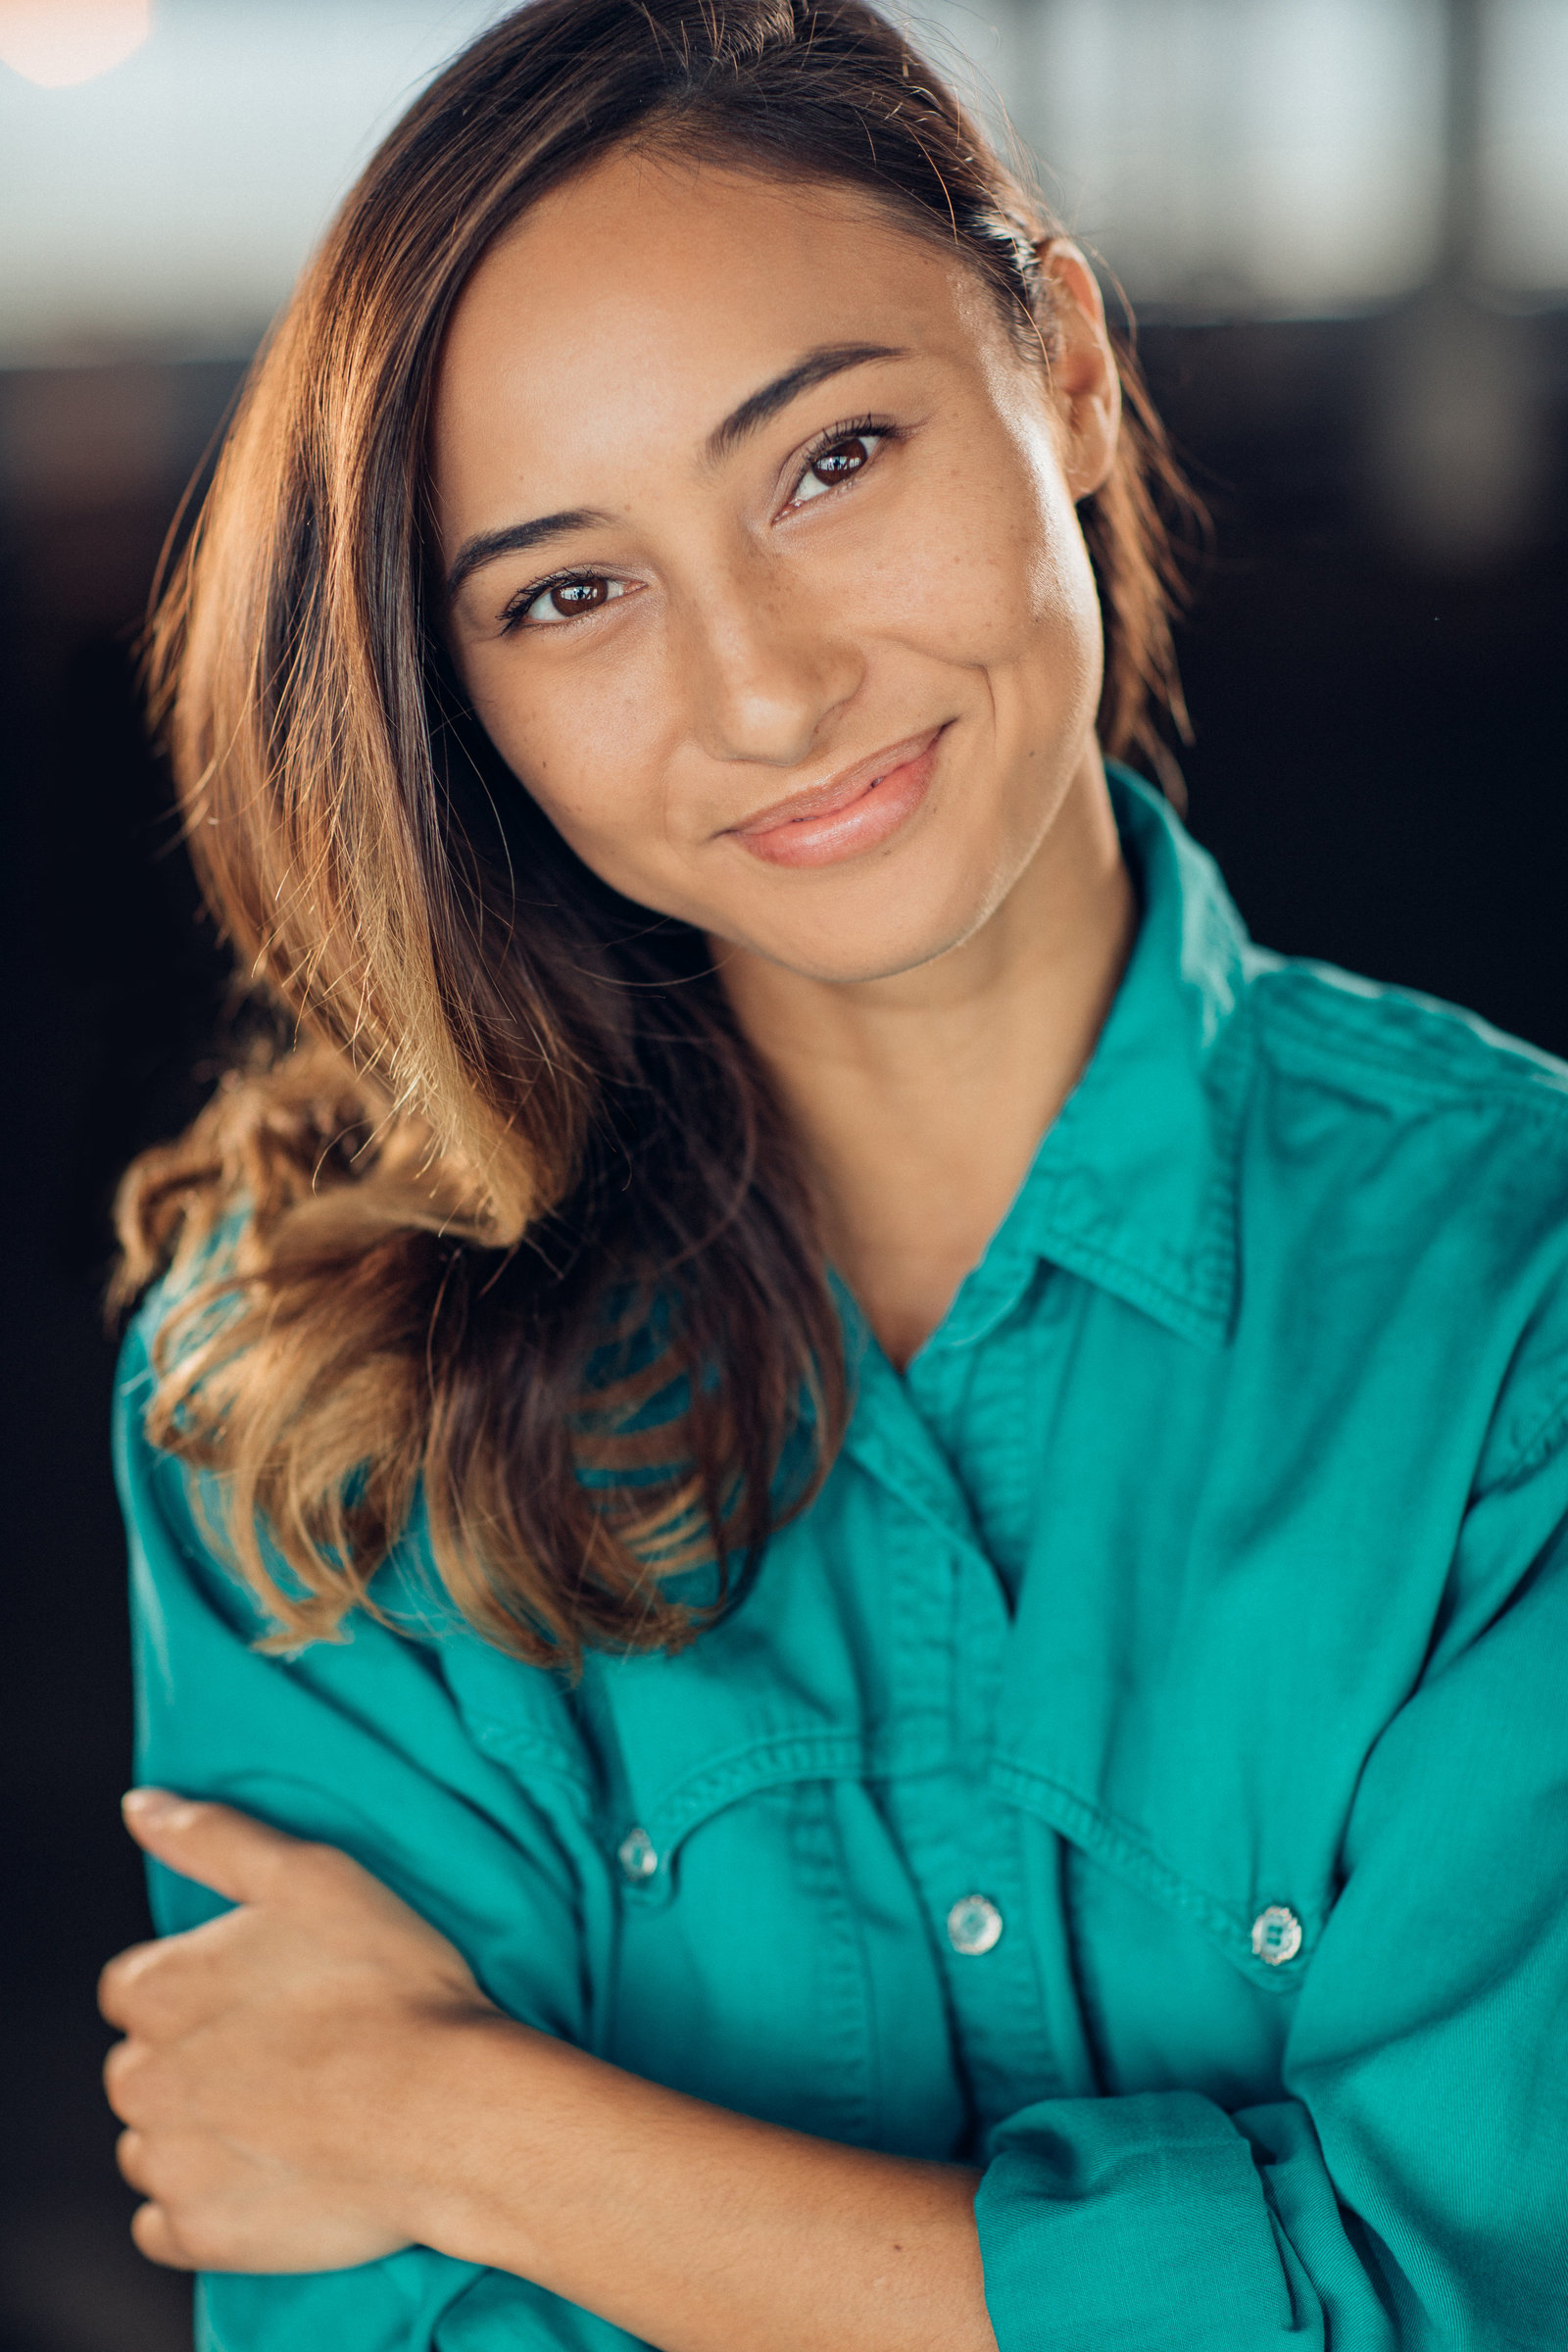 Headshot Photo Of Young Woman In Blue Green Polo